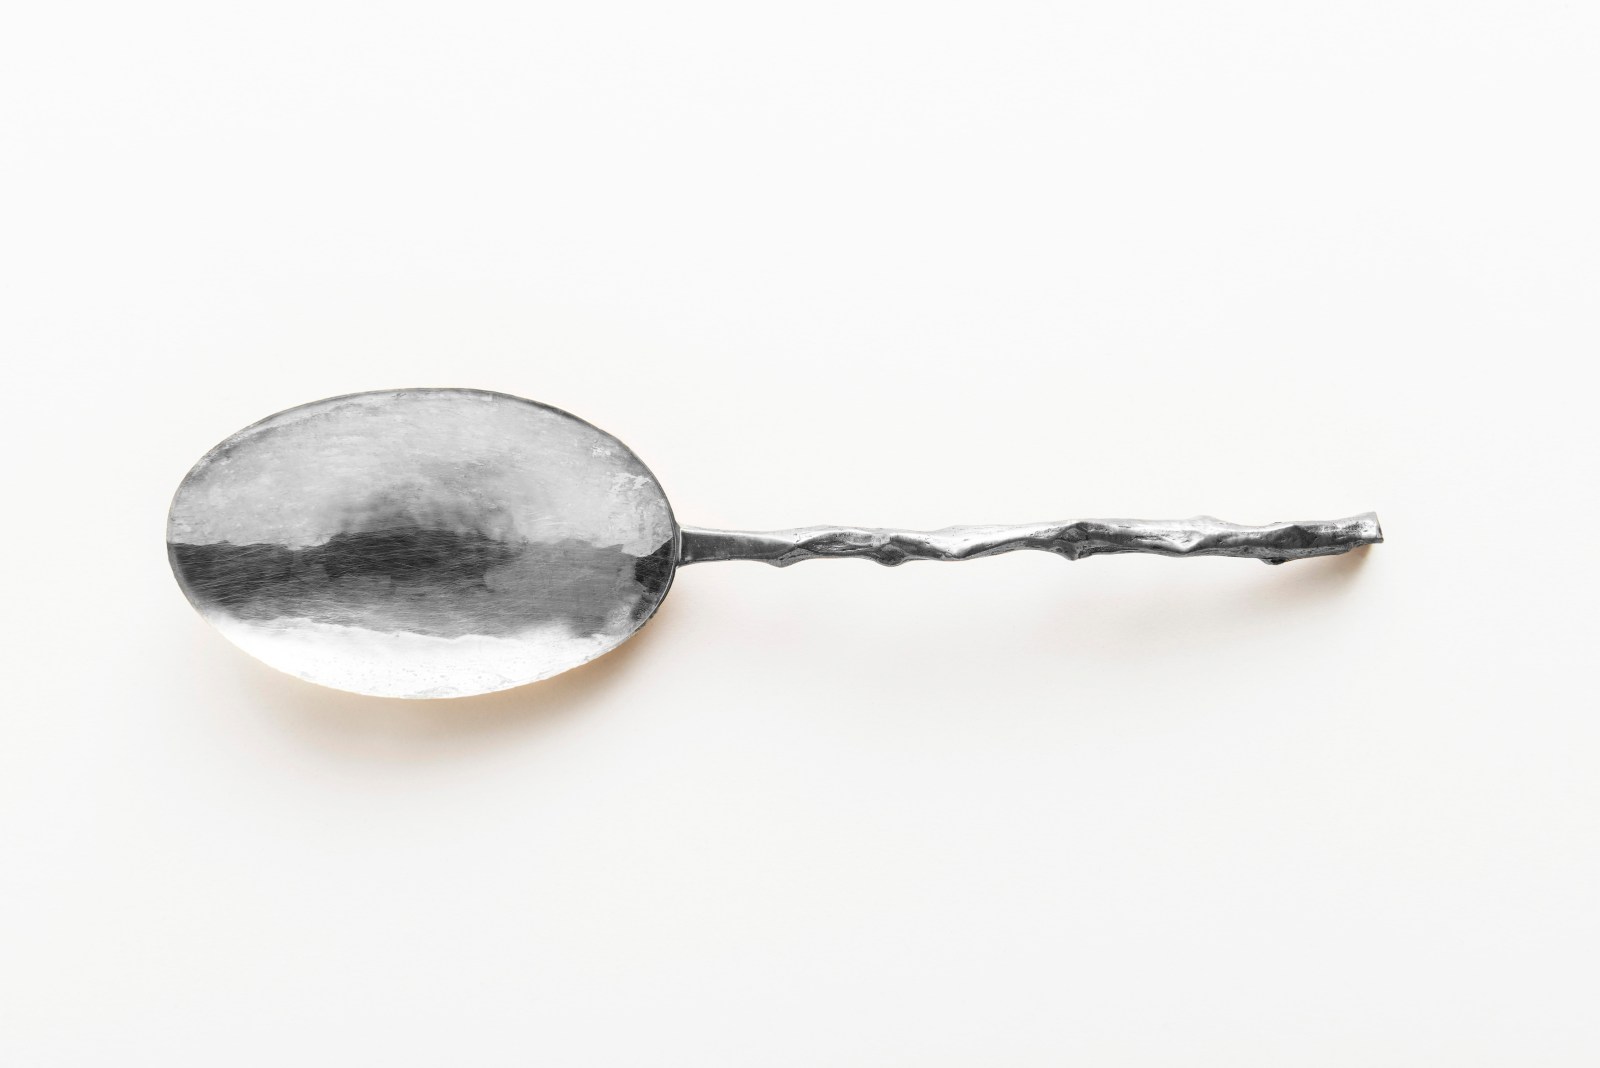 Rose Branch Risotto Serving Spoon Plated in Silver